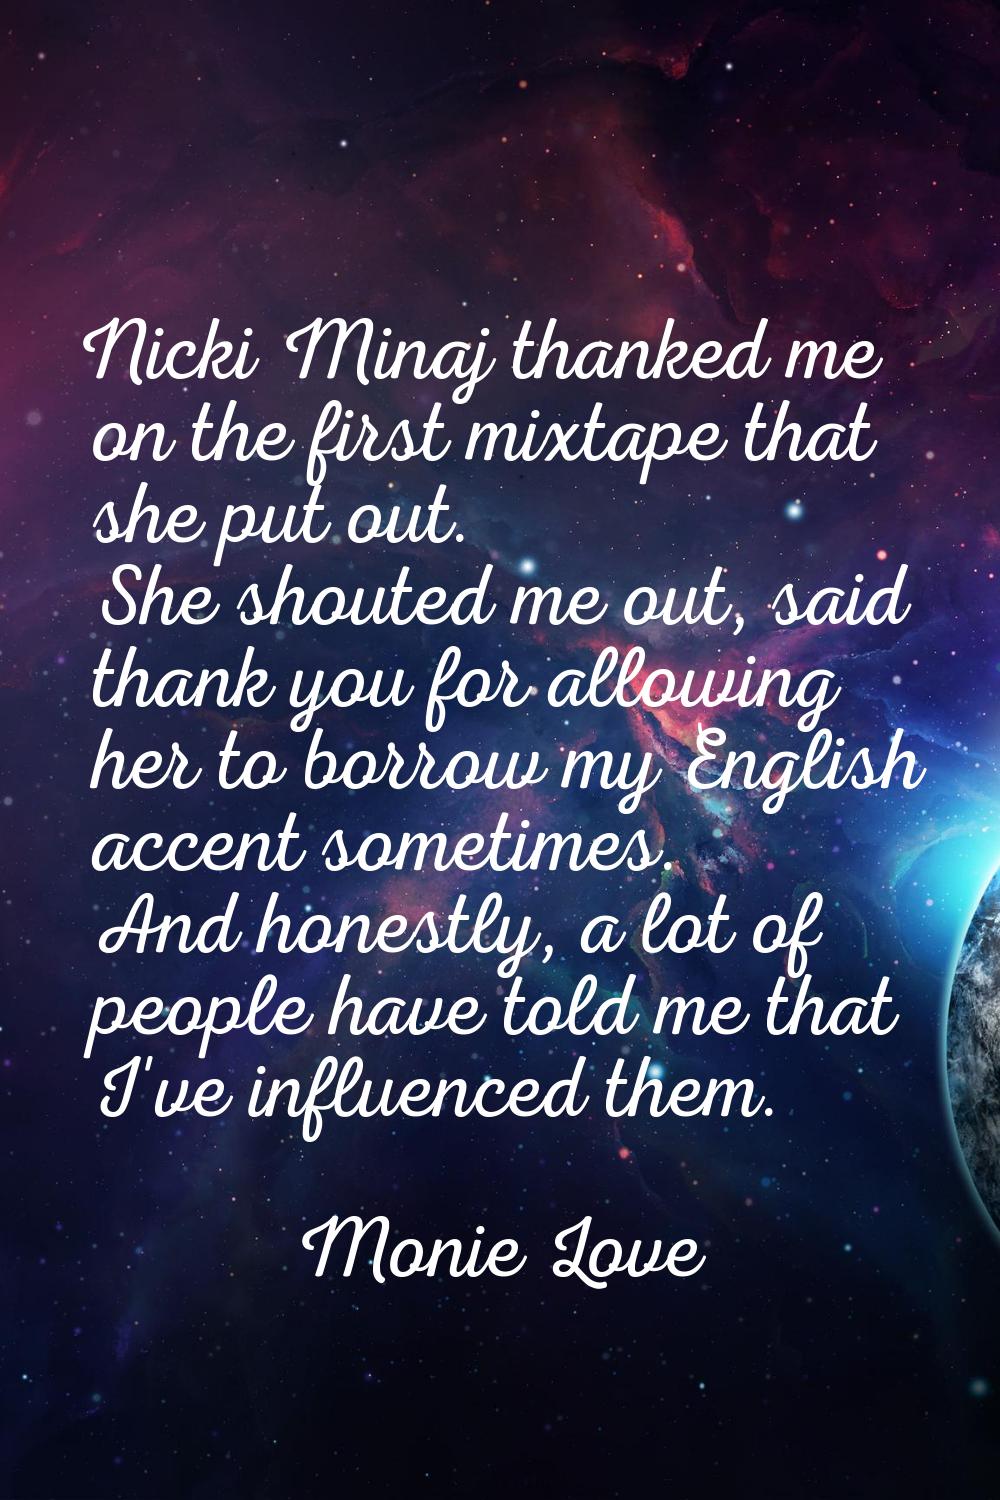 Nicki Minaj thanked me on the first mixtape that she put out. She shouted me out, said thank you fo